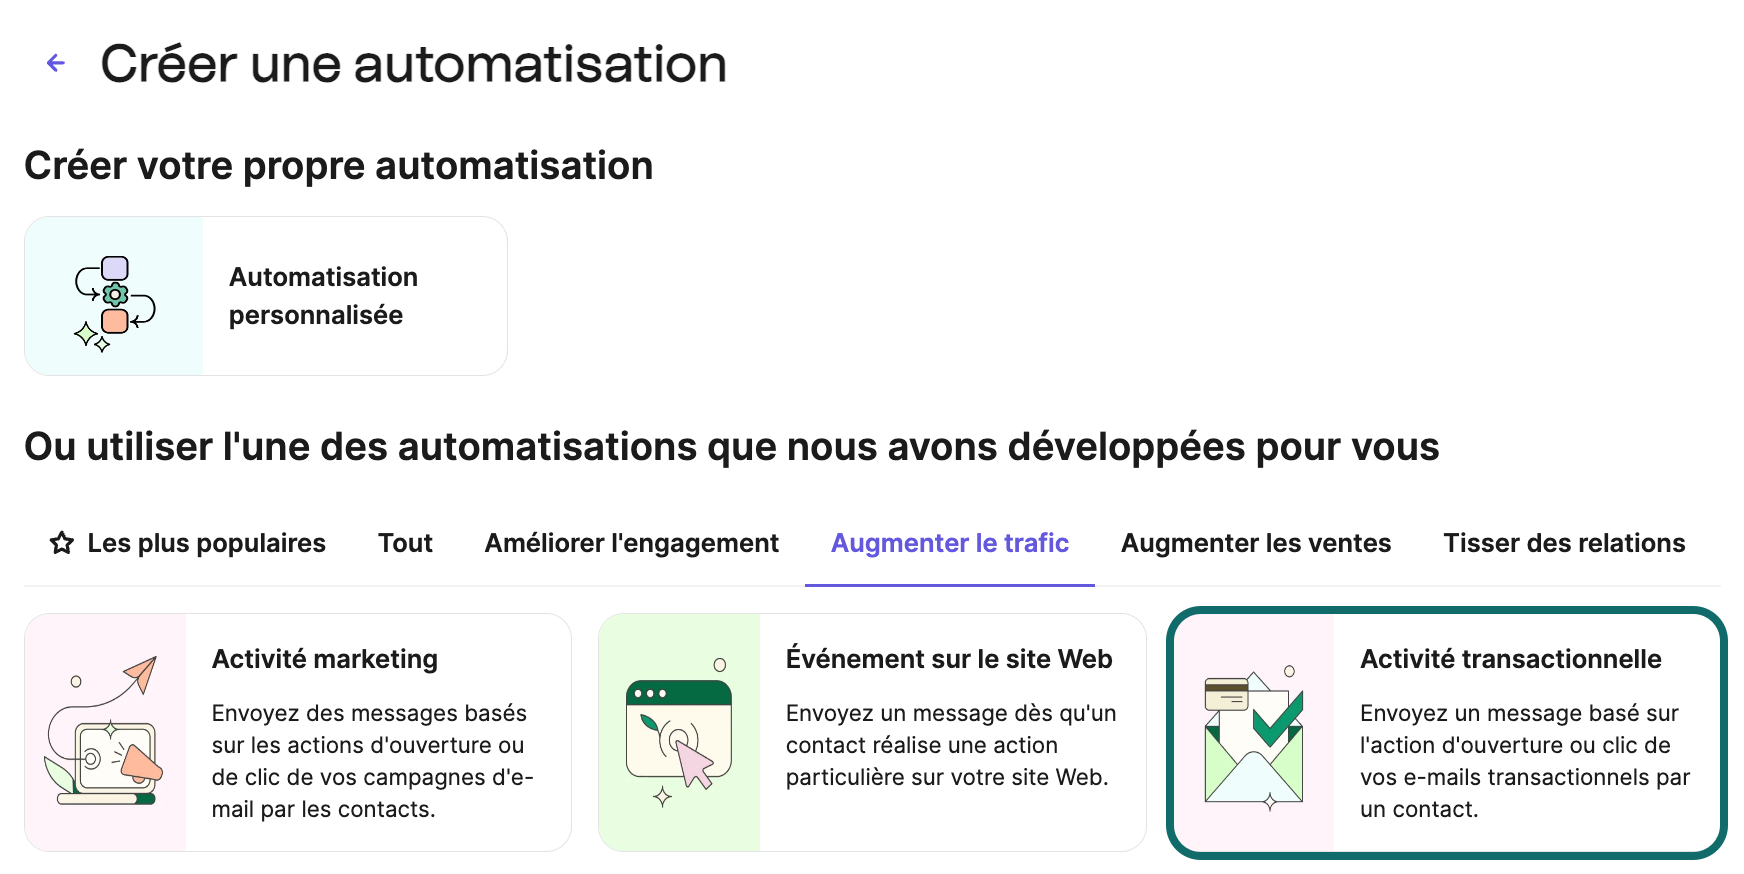 automations_transactional-activity-card_FR.png